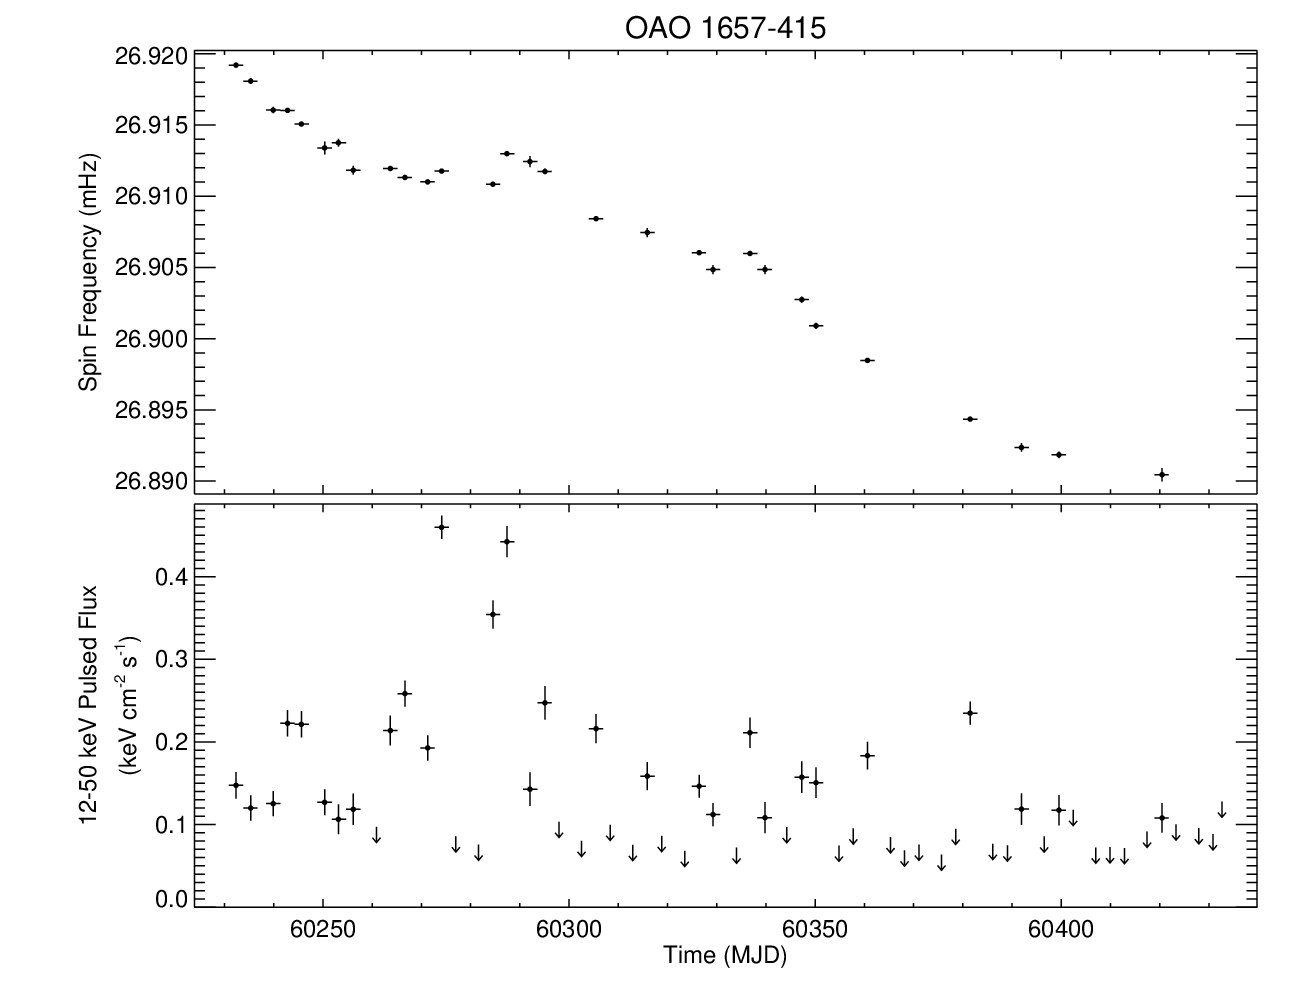 OAO 1657-415 Short Frequency History